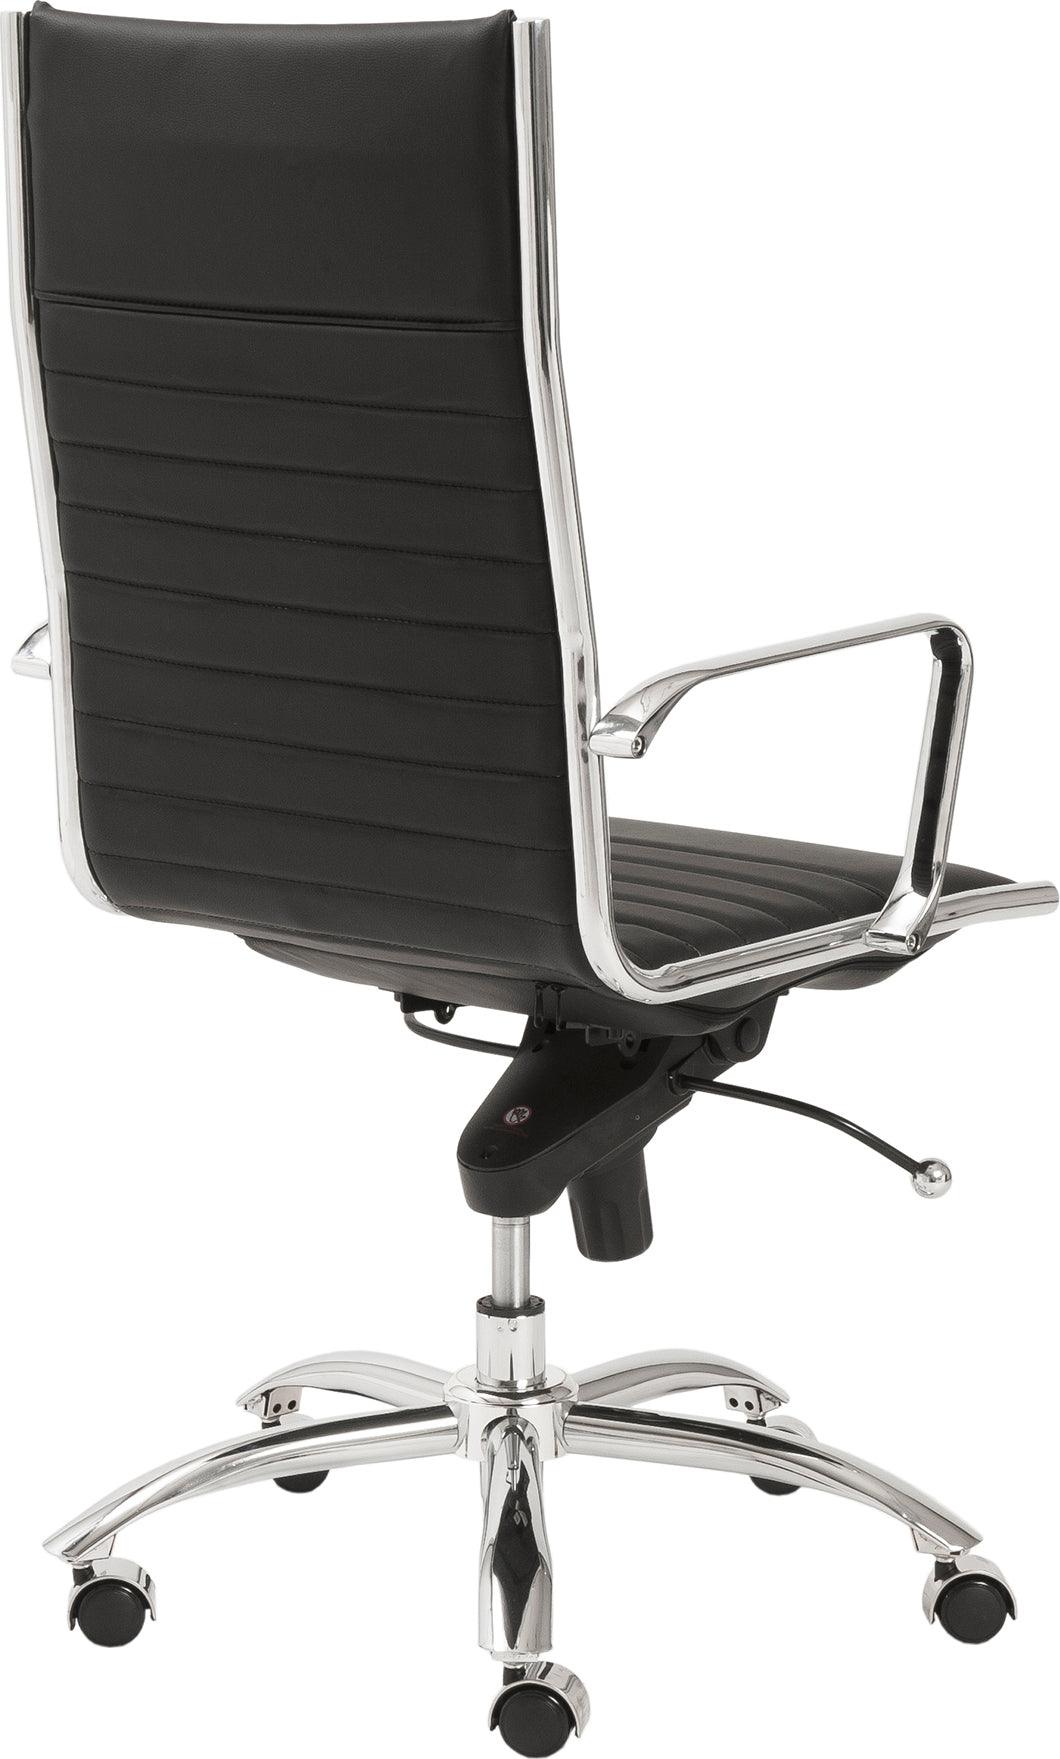 Euro Style Task Chairs - Dirk High Back Office Chair Black